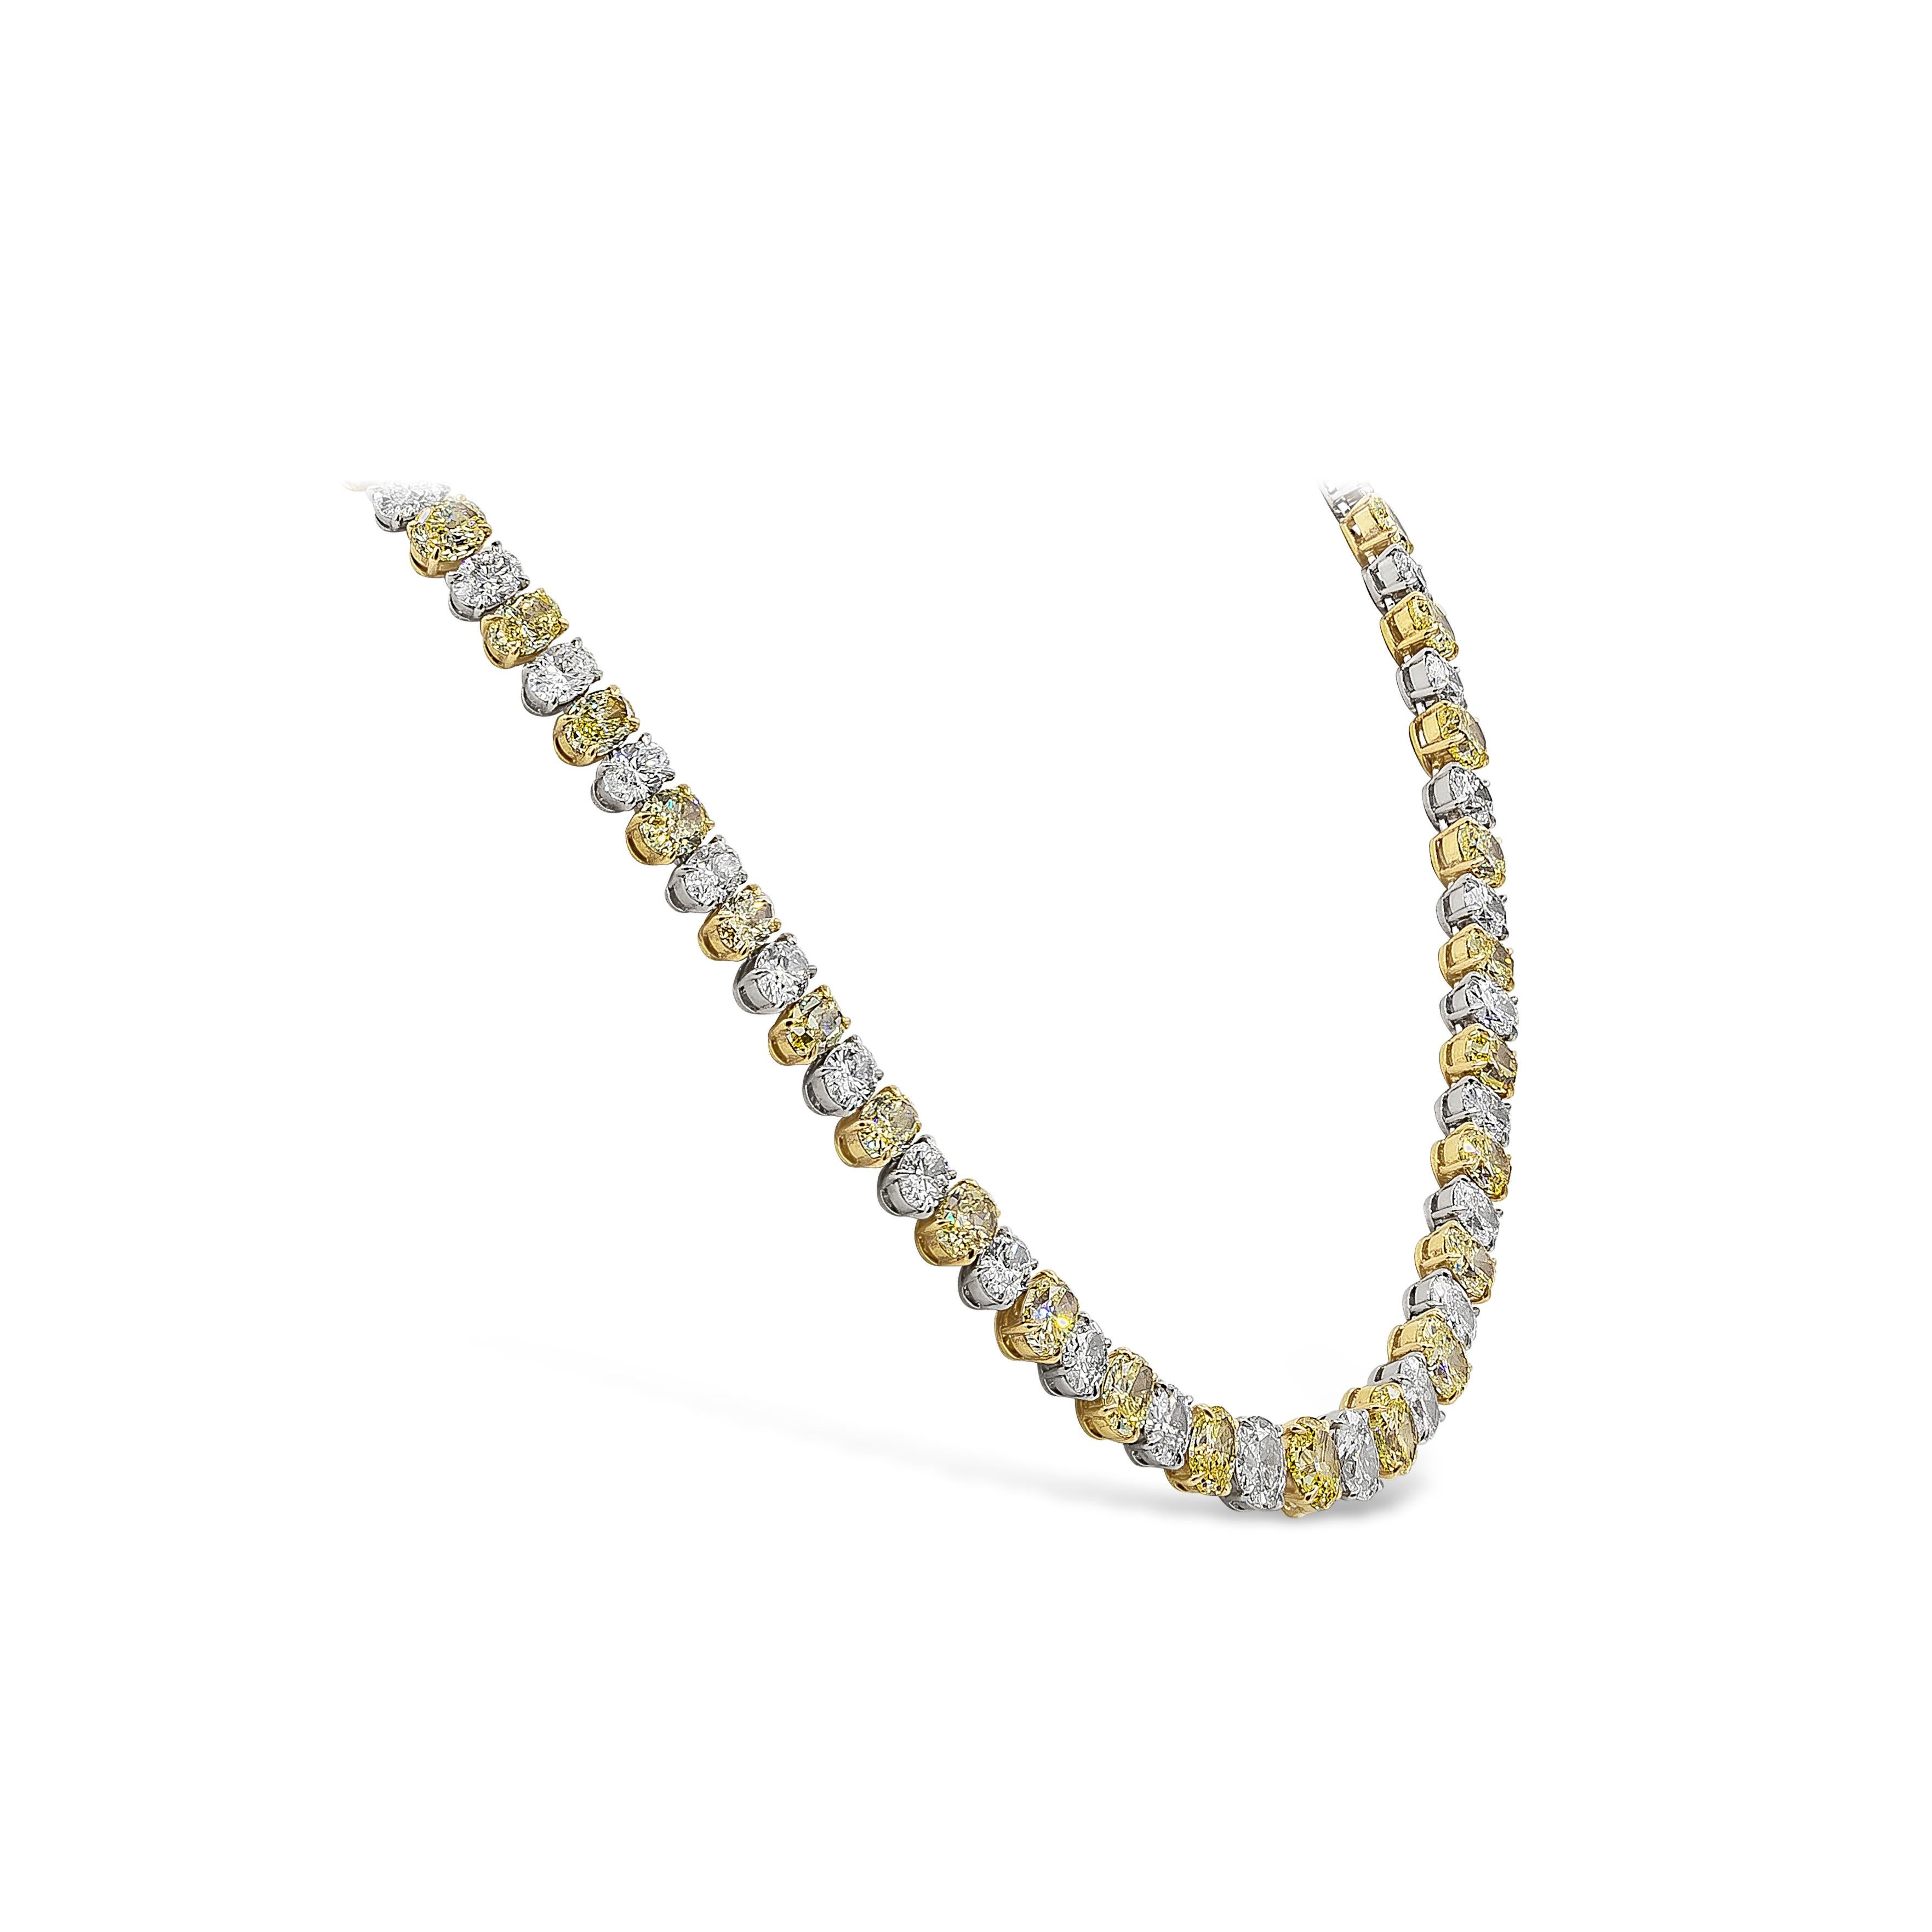 Spectacular piece of high end jewelry necklace showcasing 43 color-rich oval cut fancy yellow diamonds weighing 31.14 carat total, set in a four prong 18k yellow gold setting. Elegantly alternating with 43 brilliant oval cut white diamonds weighing